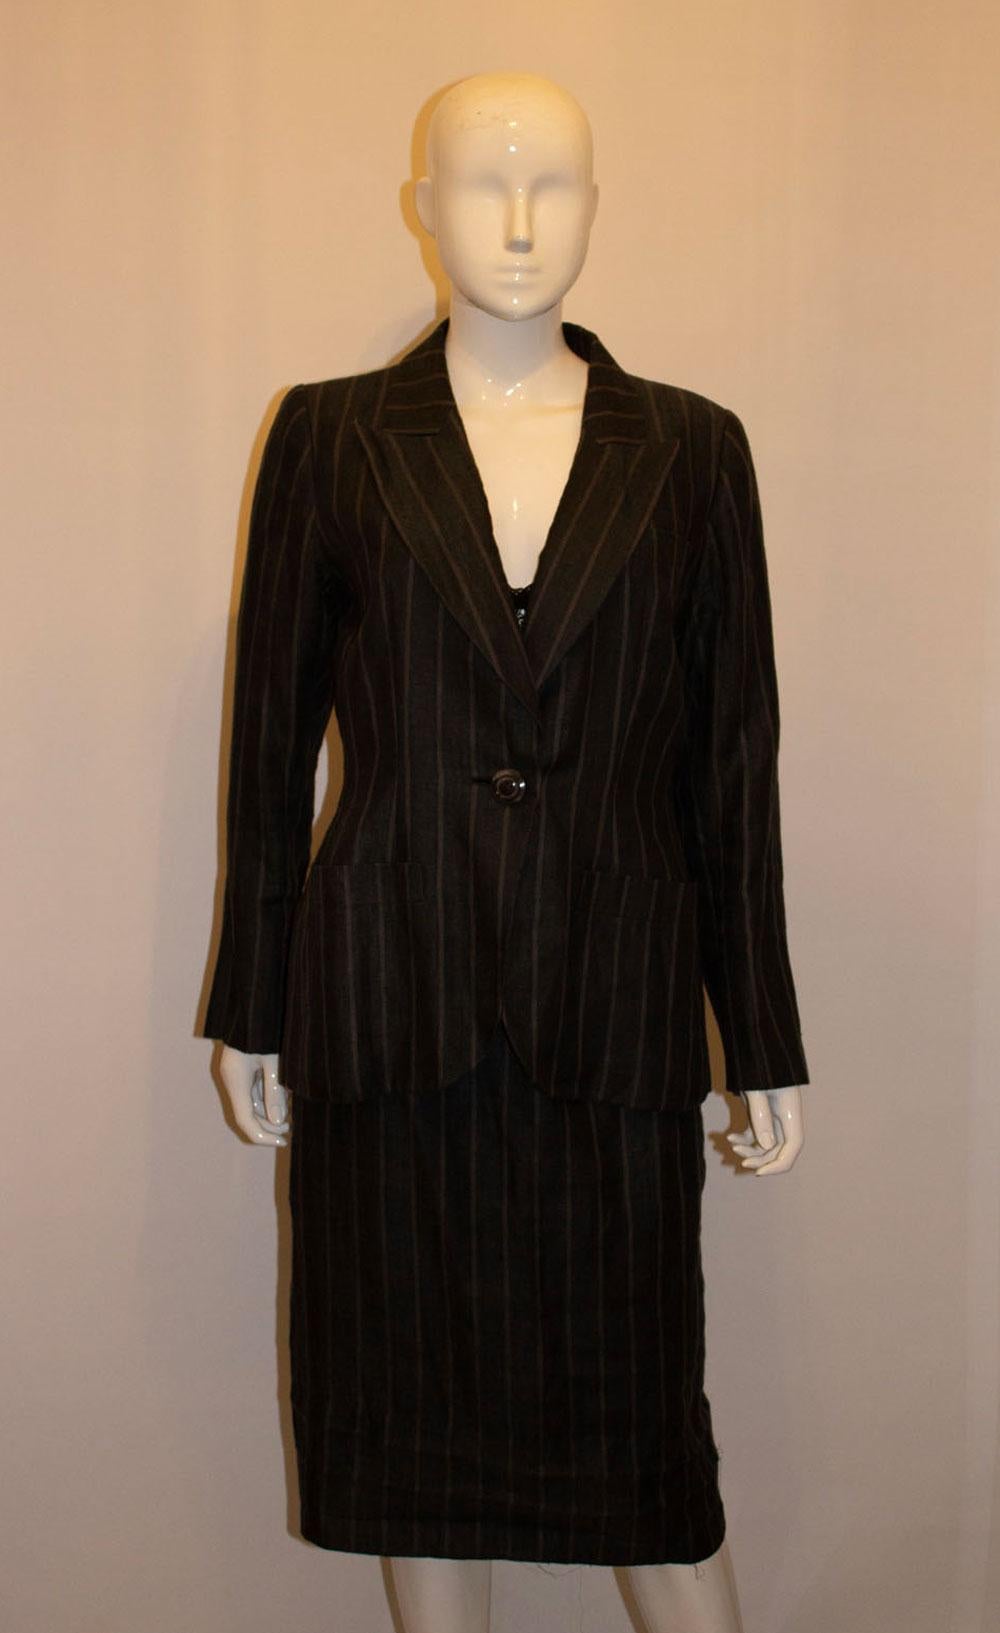 Vintage Yves Saint Laurent Rive Gauche Linen Skirt Suit In Good Condition For Sale In London, GB